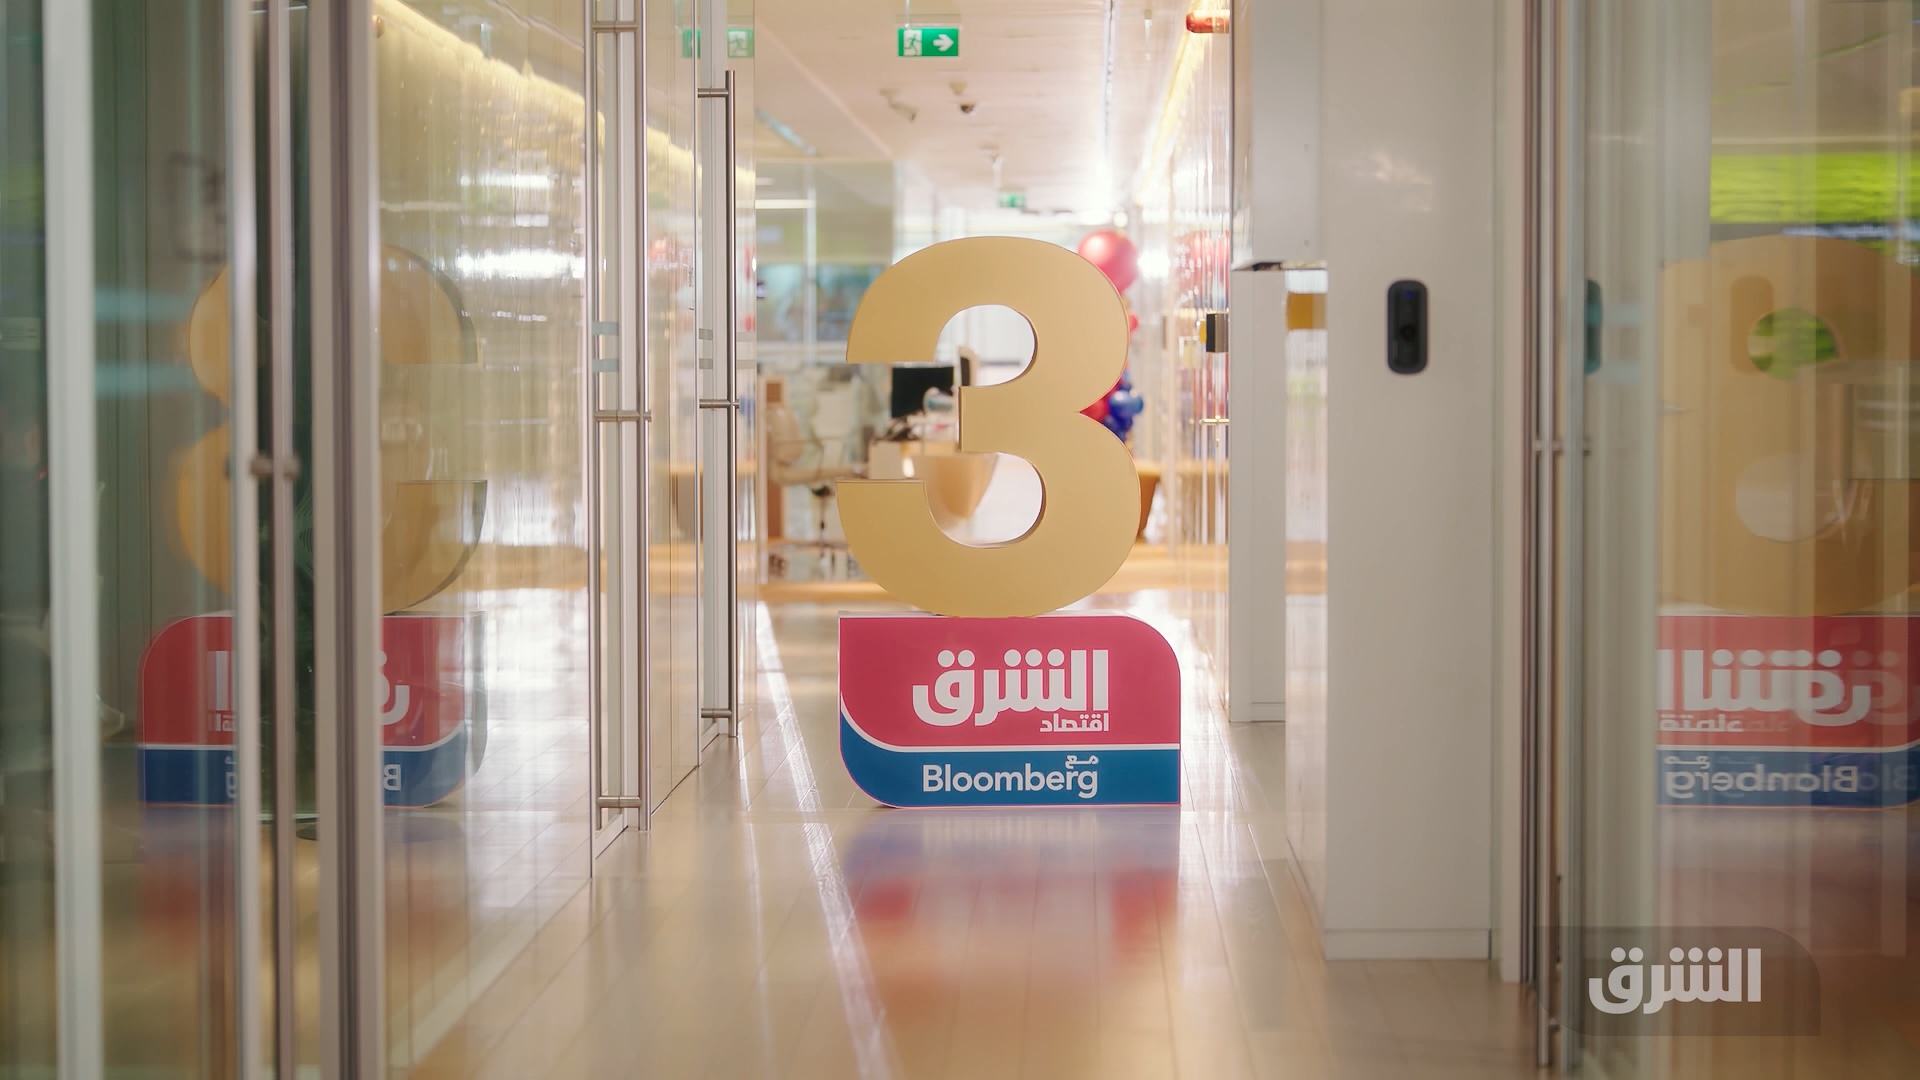 ASHARQ NEWS NETWORK CELEBRATES ITS THIRD YEAR EXPANDING ITS PORTFOLIO WITH SEVERAL NEW MULTIMEDIA PLATFORMS AND WINNING MAJOR ACCOLADES